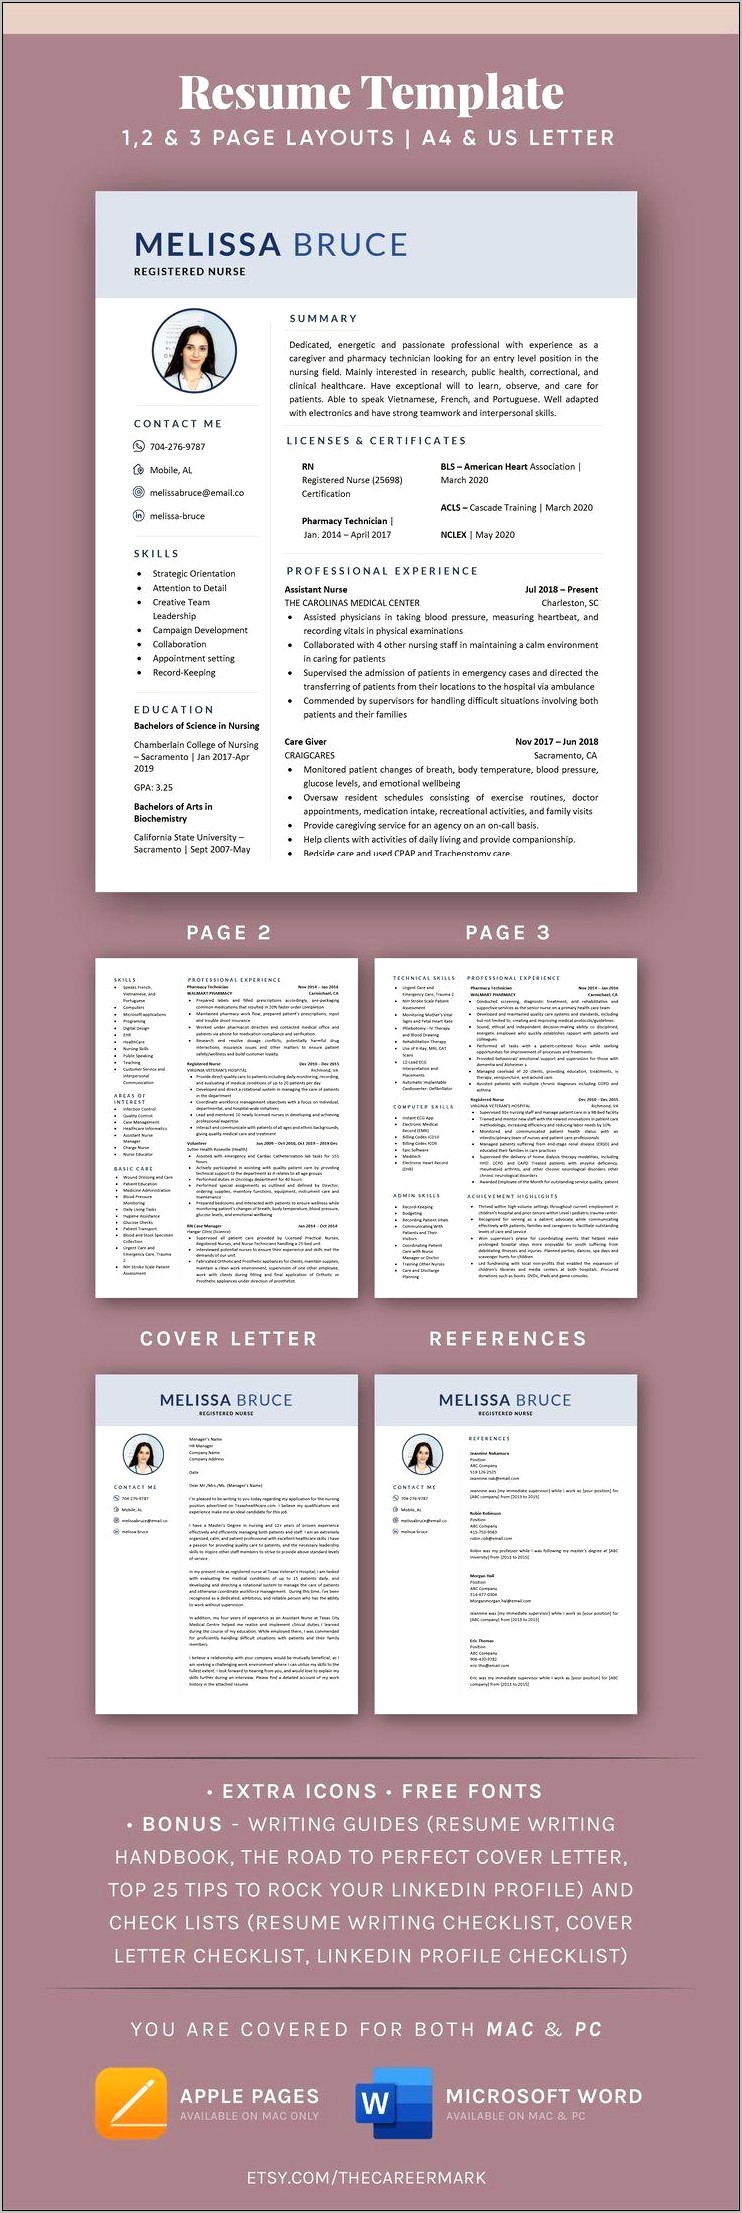 Delete Page 2 Resume Template Word